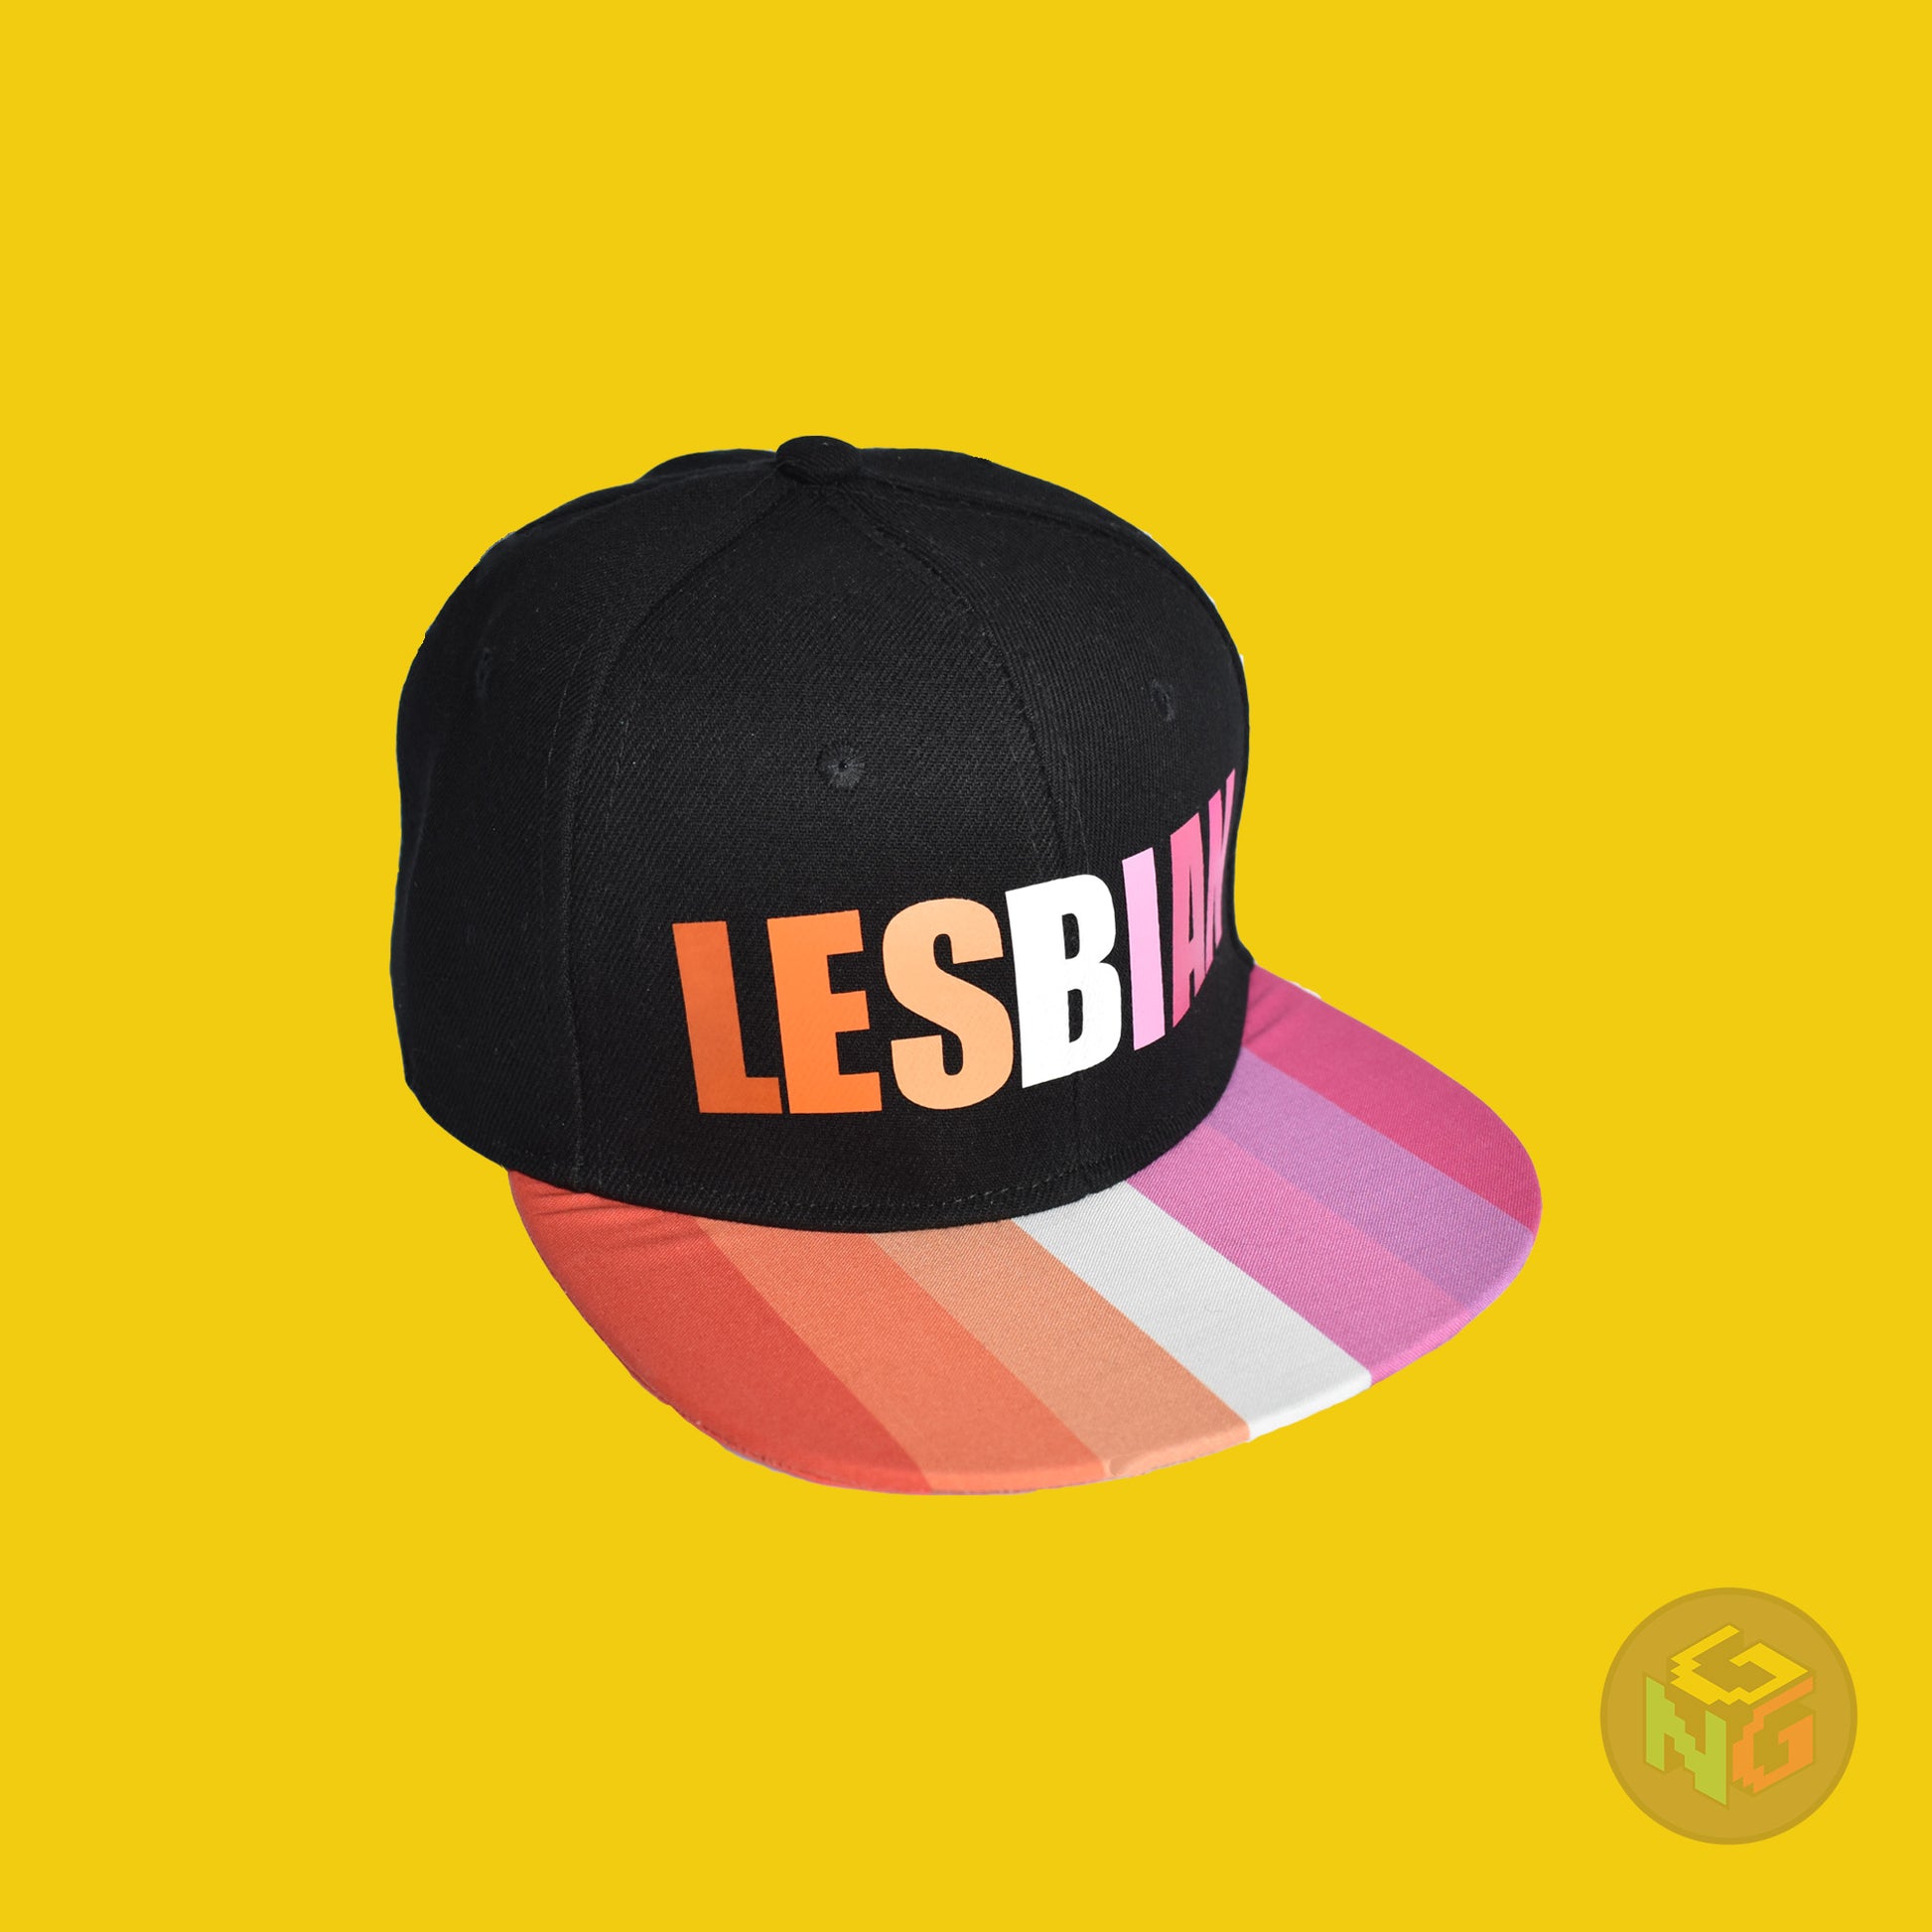 Black flat bill snapback hat. The brim has the lesbian pride flag on both sides and the front of the hat has the word “LESBIAN” in orange, pink, and white letters. Front right view